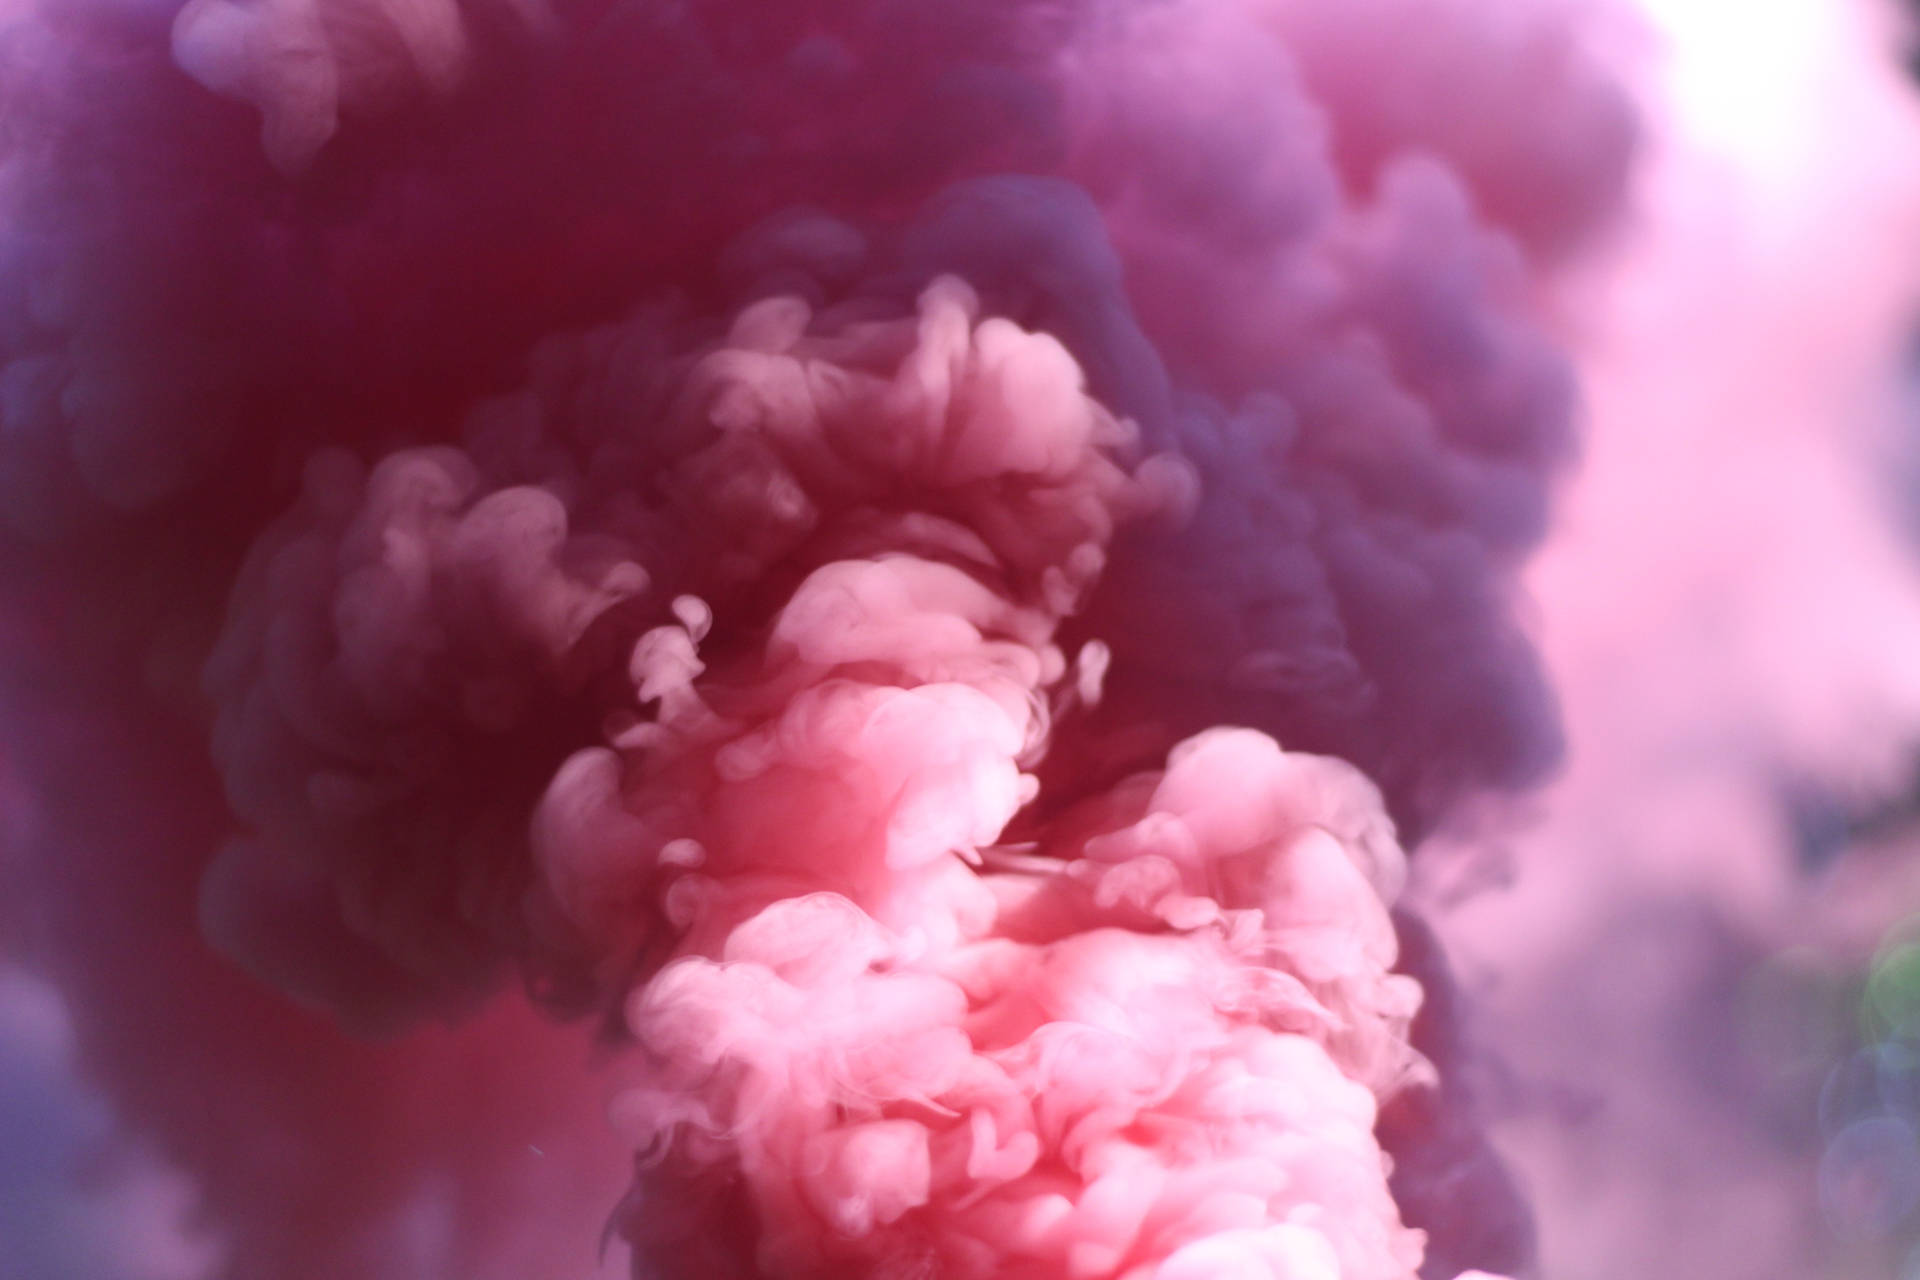 "Colorful Explosion of Pink Smoke" Wallpaper